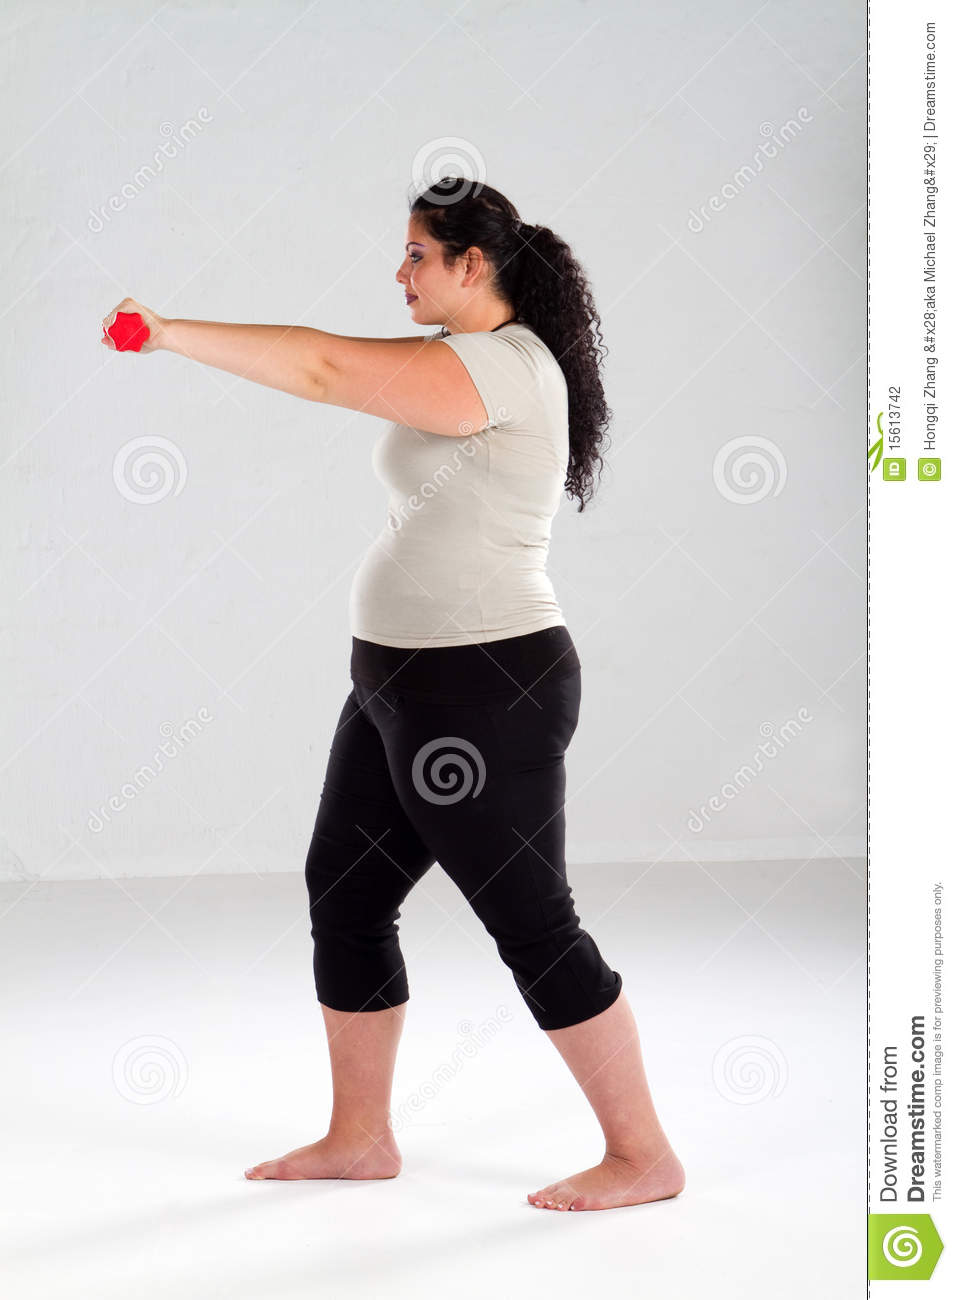 Portrait Of An Overweight Woman Working Out With Hand Weights On White    